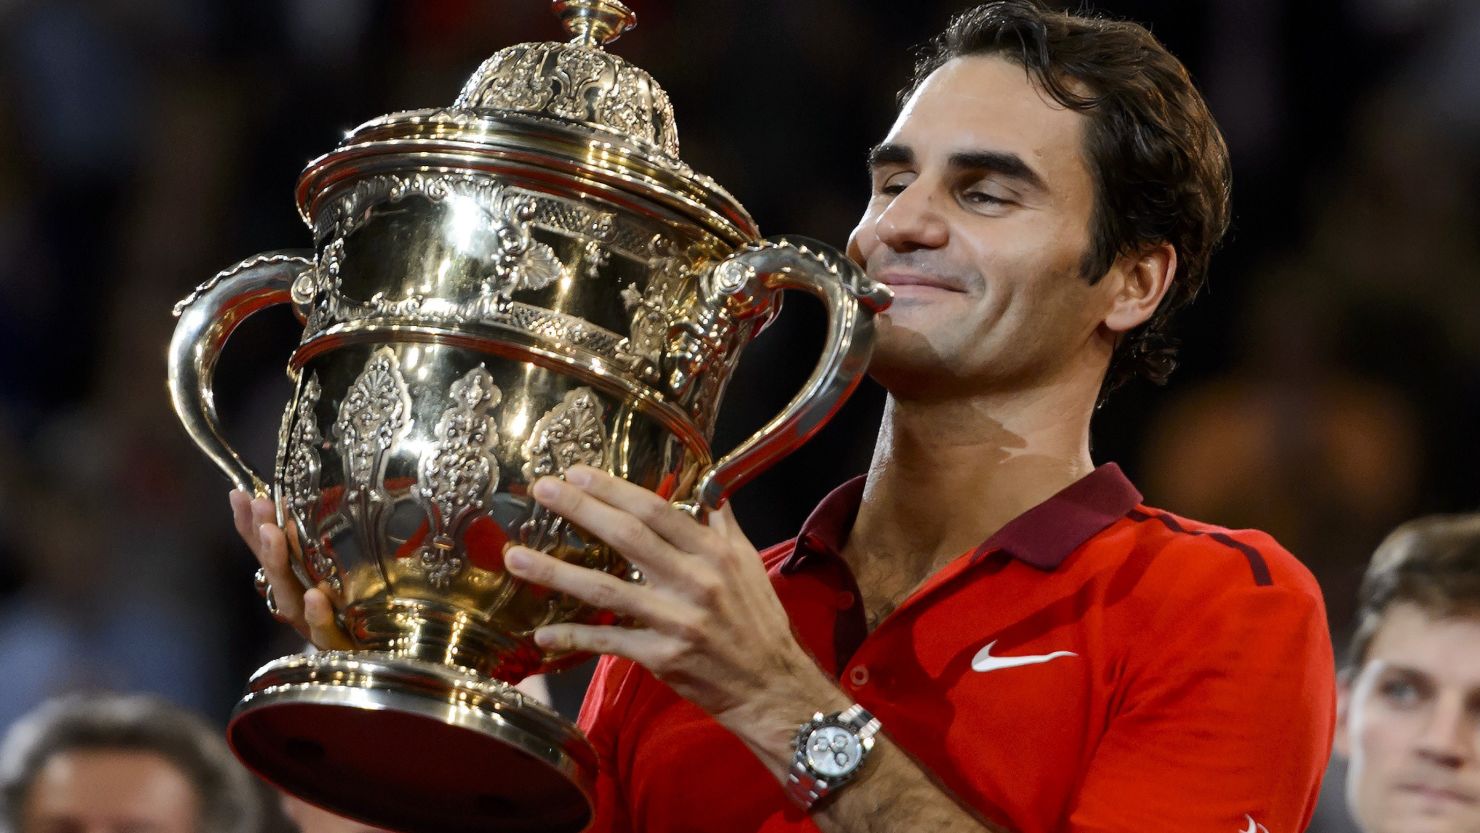 Roger Federer lifts the trophy in Basel for the sixth time after beating David Goffin in the final.